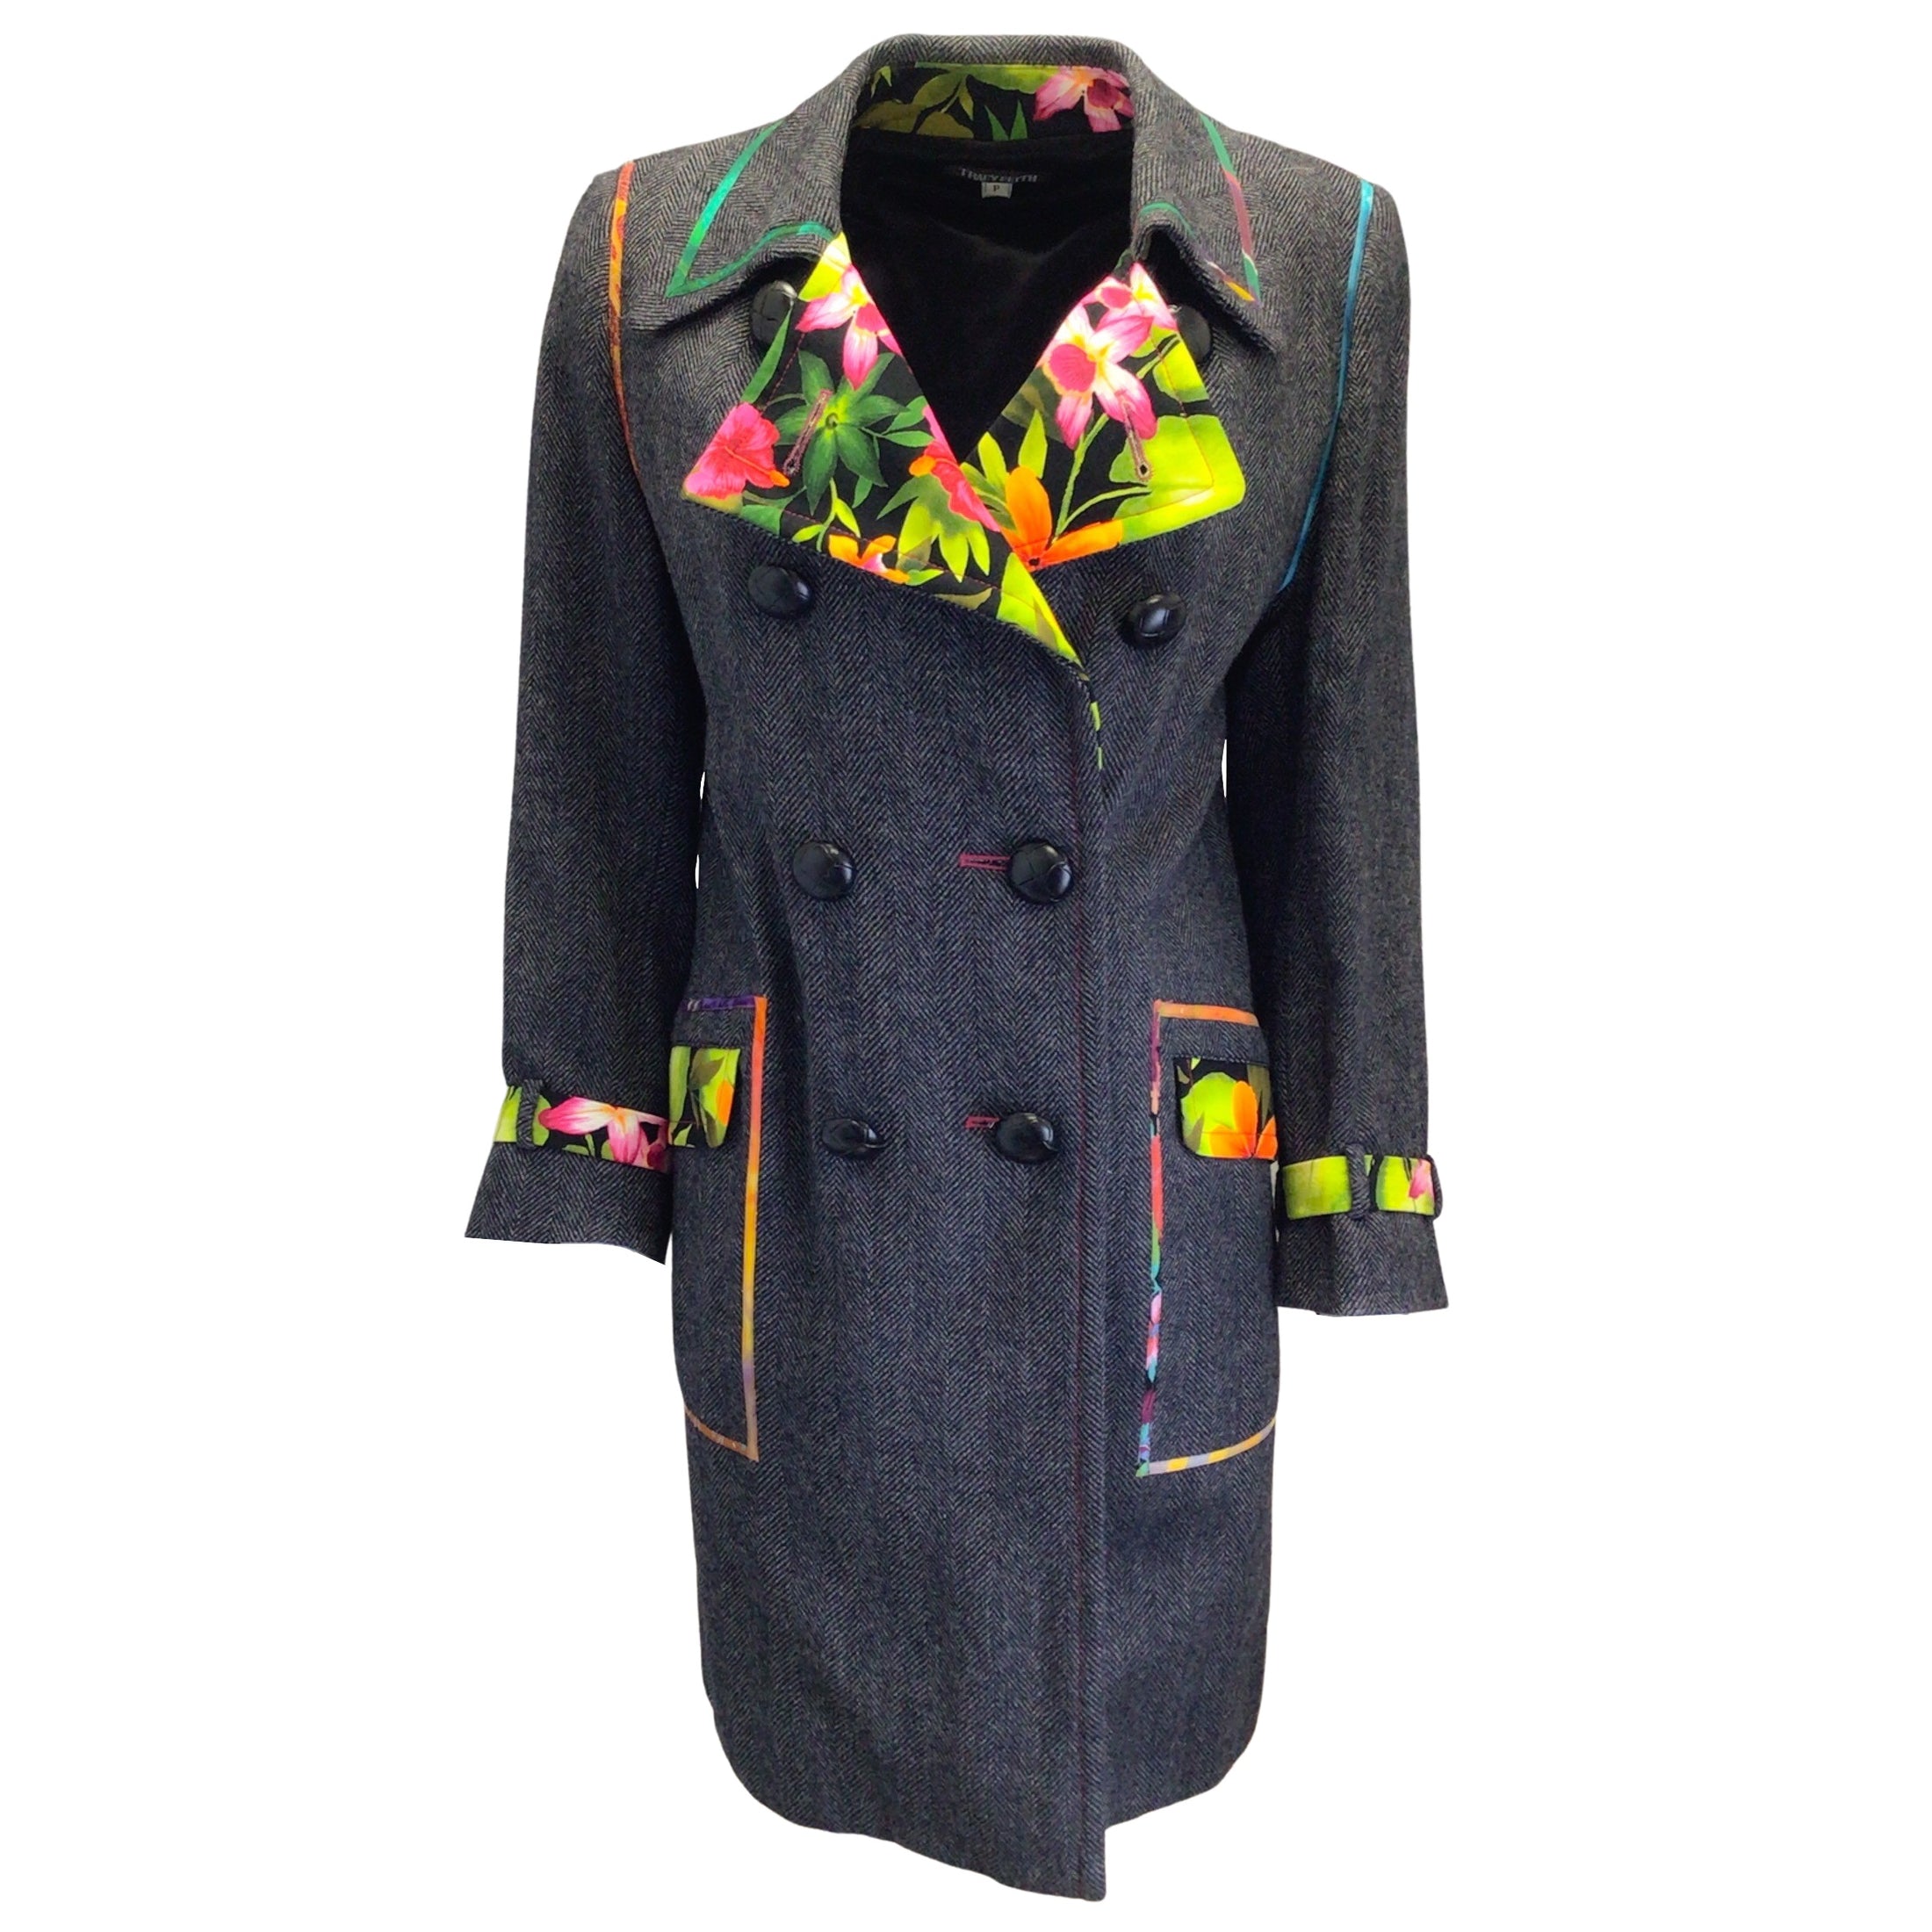 Tracy Feith Charcoal Grey Multi Floral Printed Trimmed Wool Tweed Coat